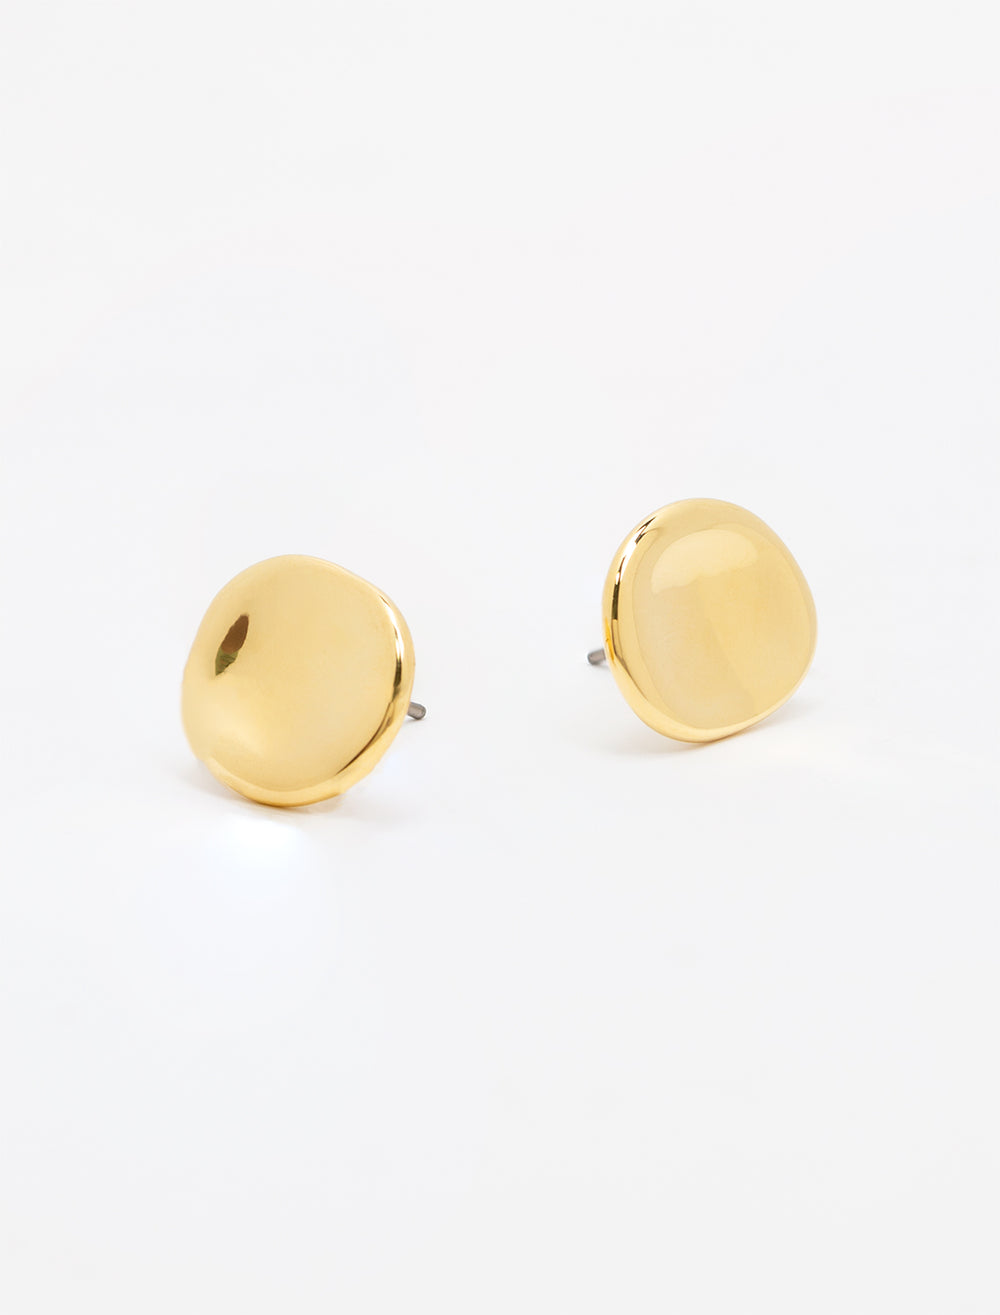 Close-up view of concave gold button earrings